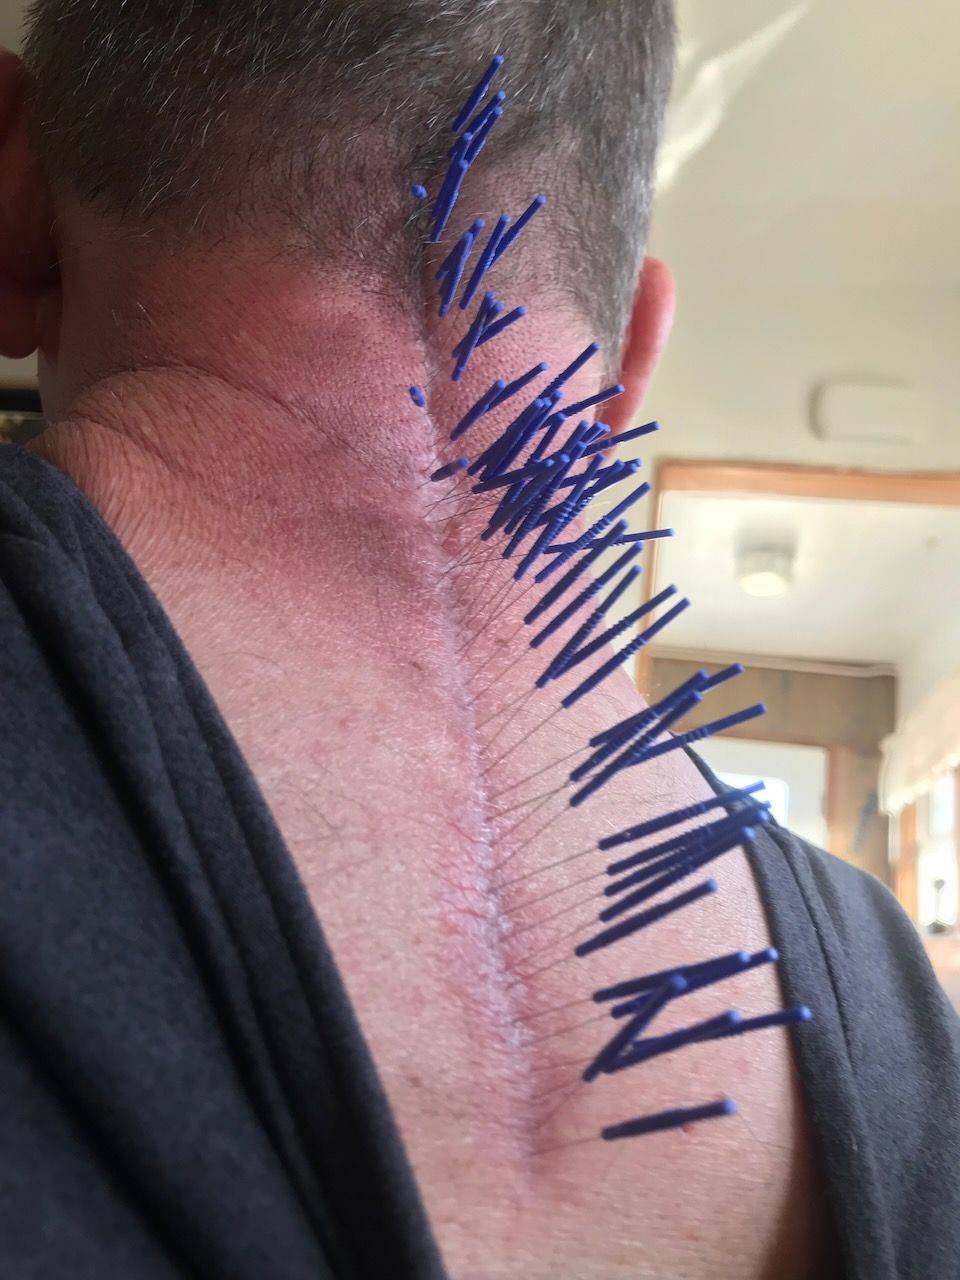 Dry Needling Scar Tissue to Regulate the Autonomic Nervous System